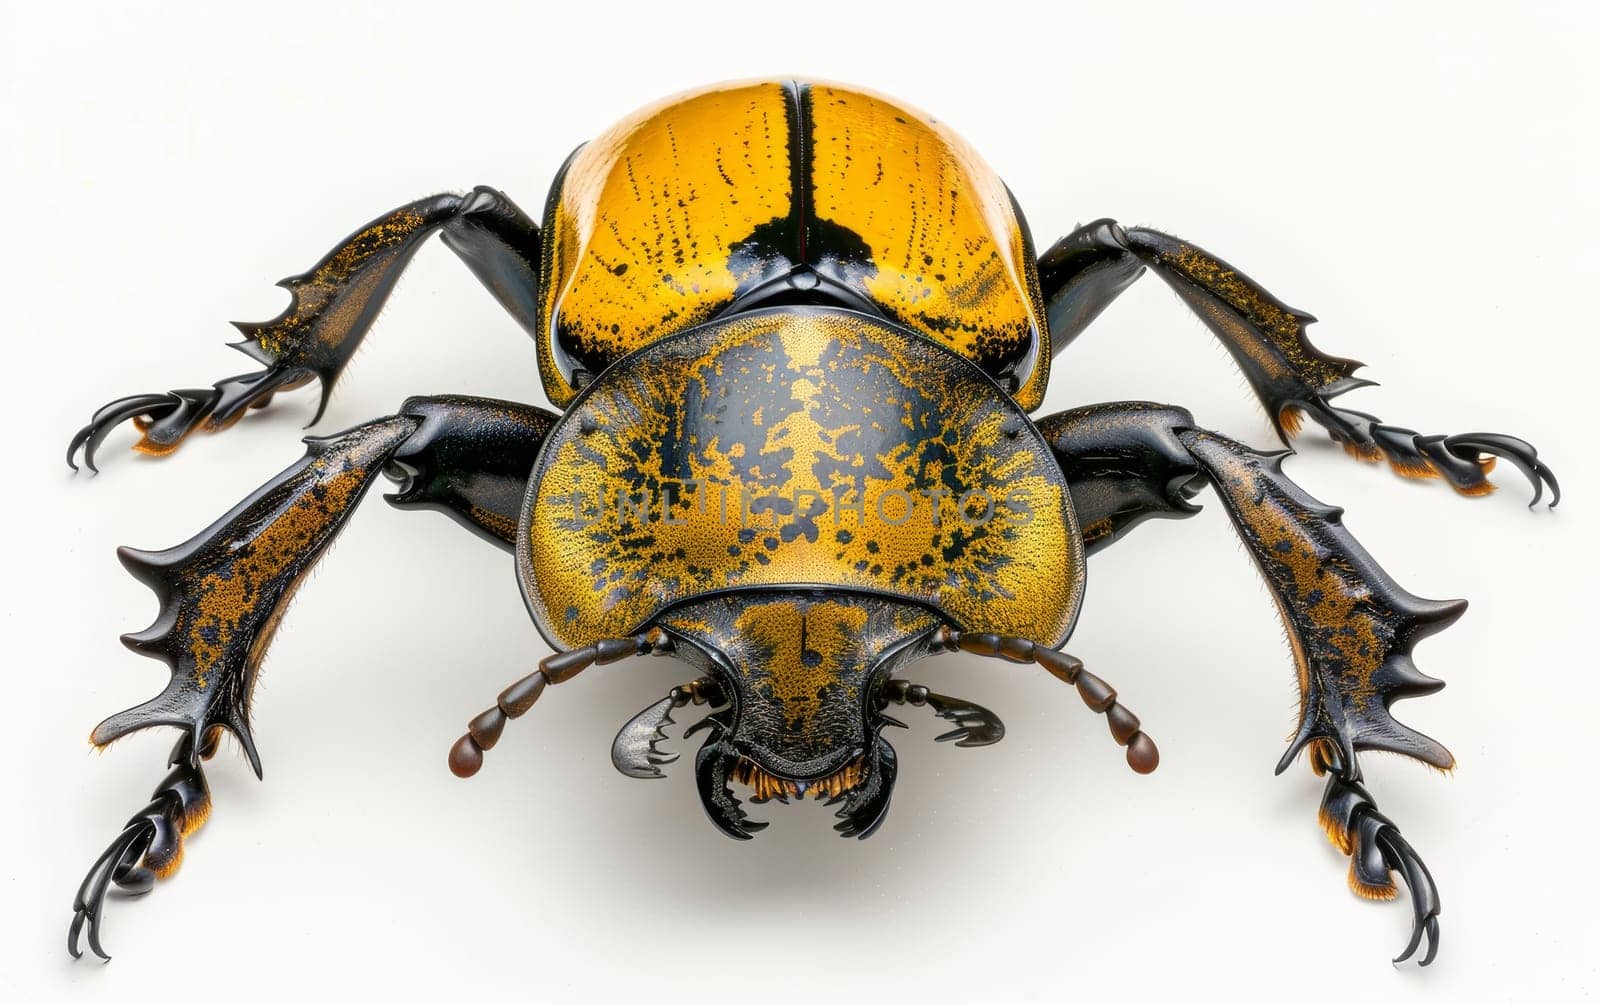 The Hercules beetle is presented in full splendor, its golden shell and intricate patterns highlighted against a stark white background.